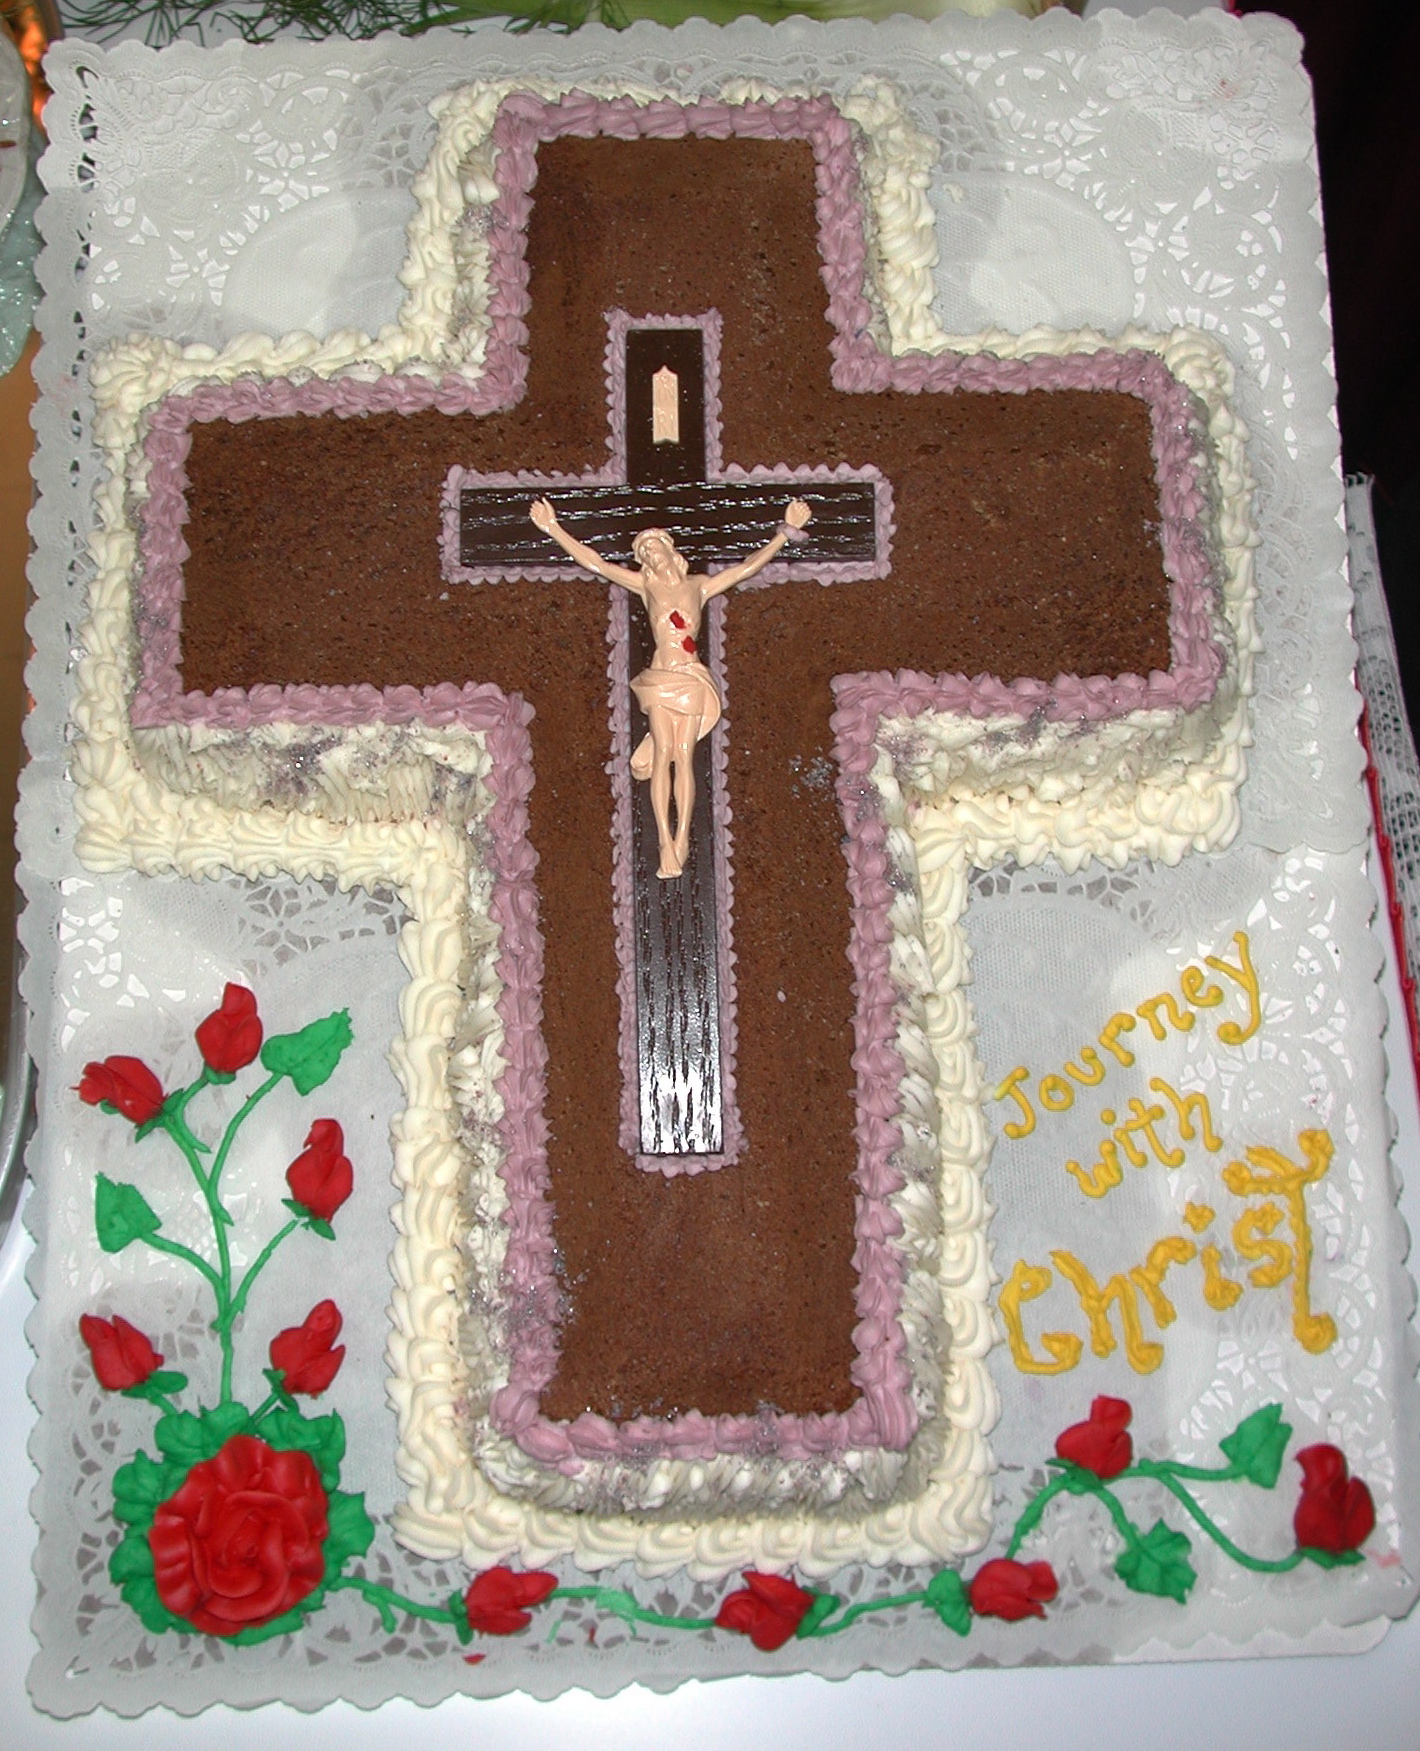 a decorated cake that has a crucifix on it